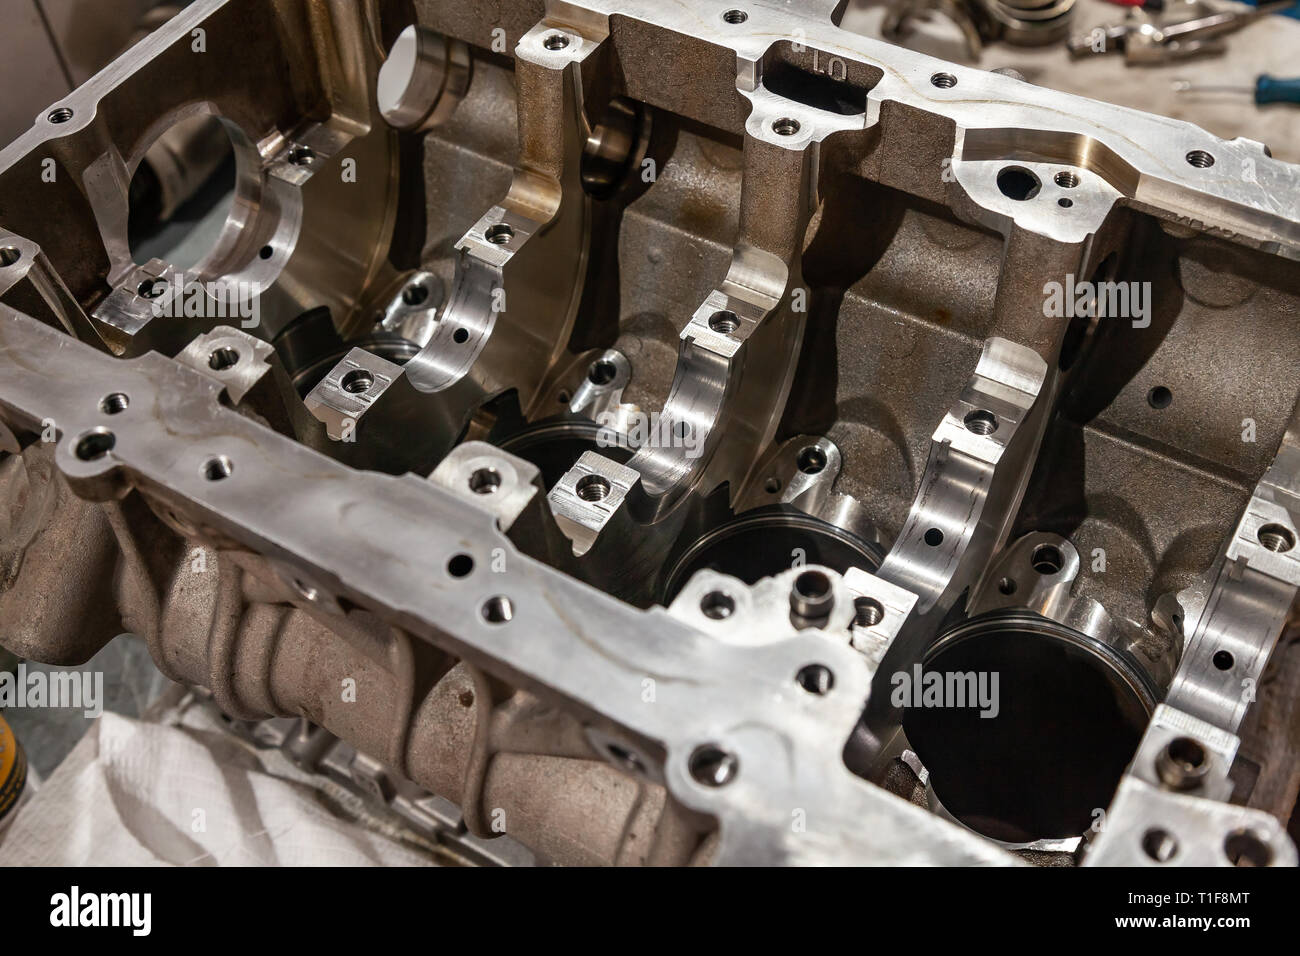 A four-cylinder engine dissembled and removed from car on a workbench in a vehicle repair workshop. Auto service industry. Stock Photo